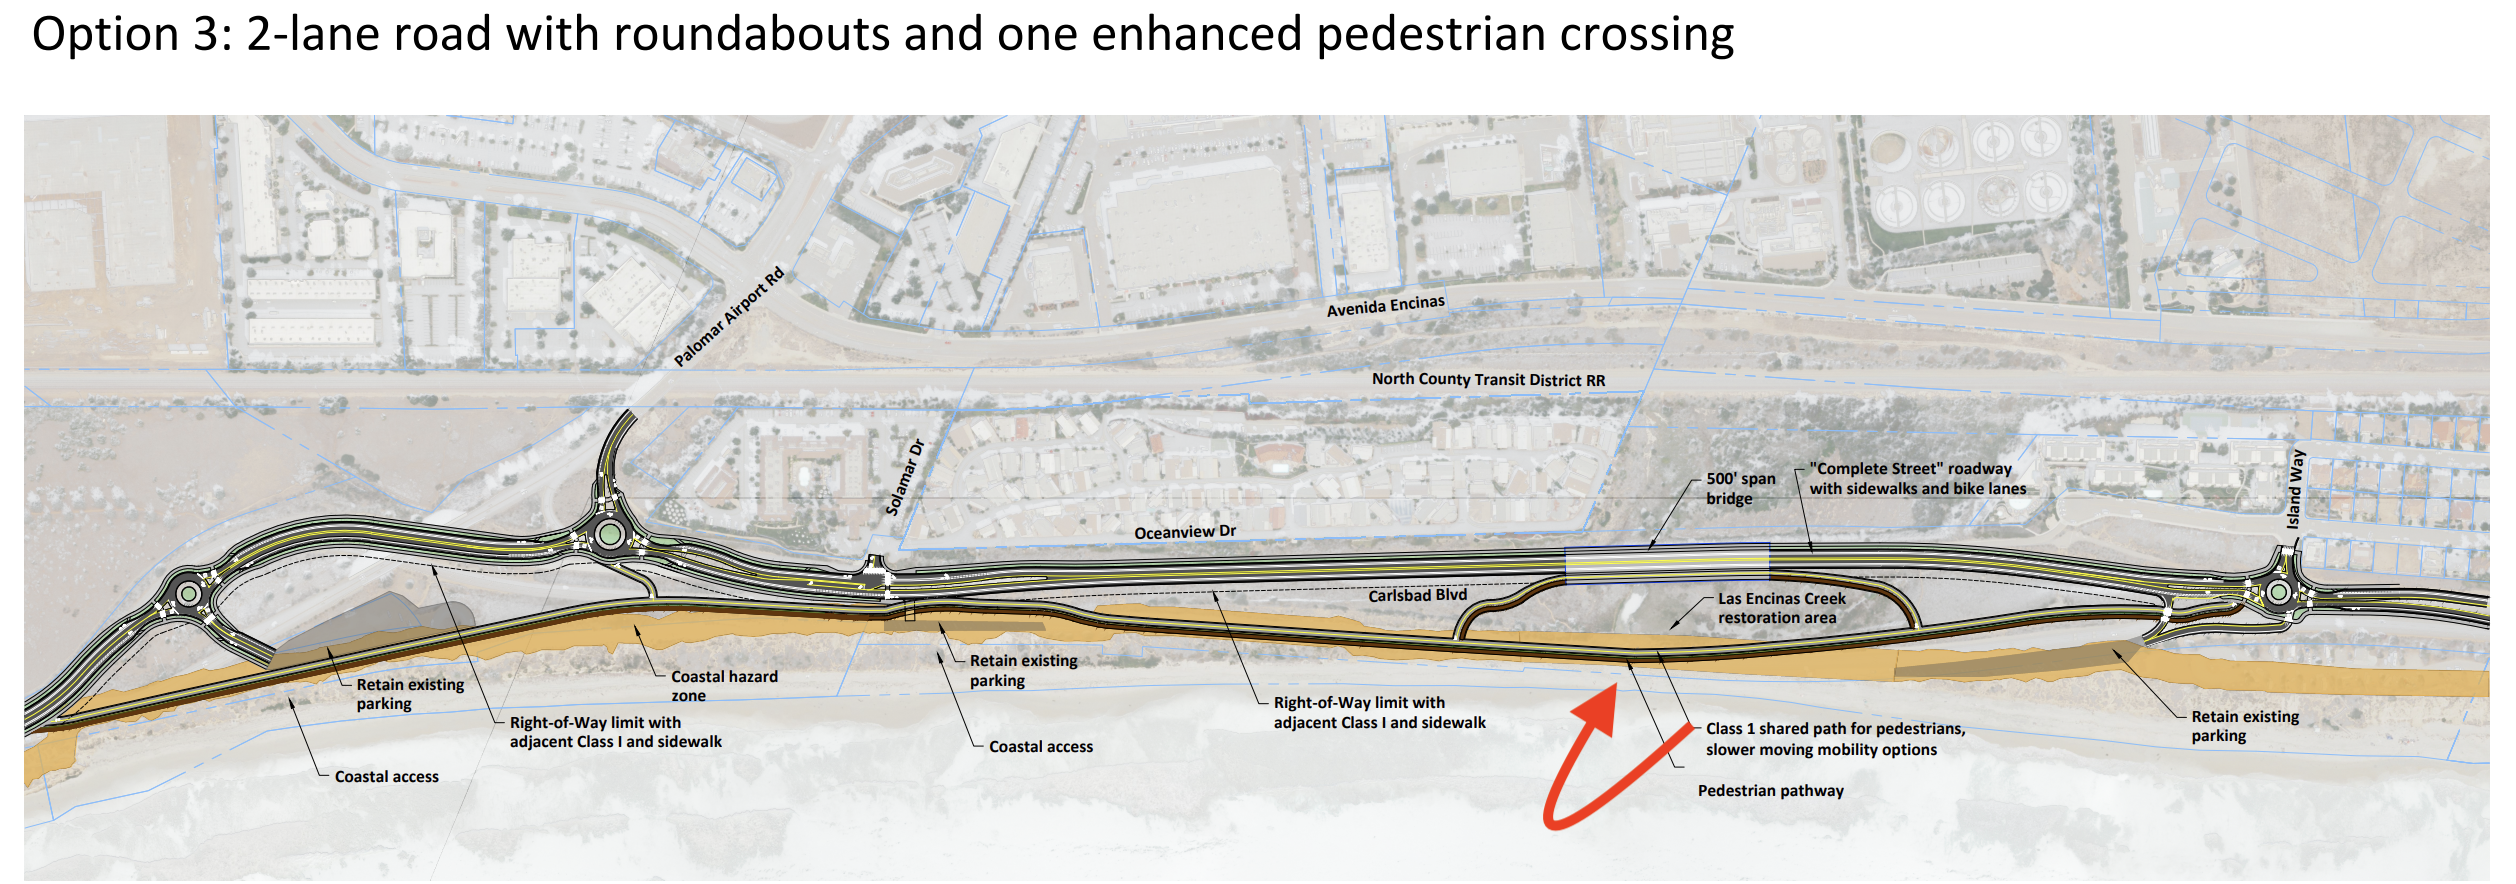 a rendering of one of the roadway alternatives, showing that the existing southbound lane remains and becomes a protected bike and pedestrian path.